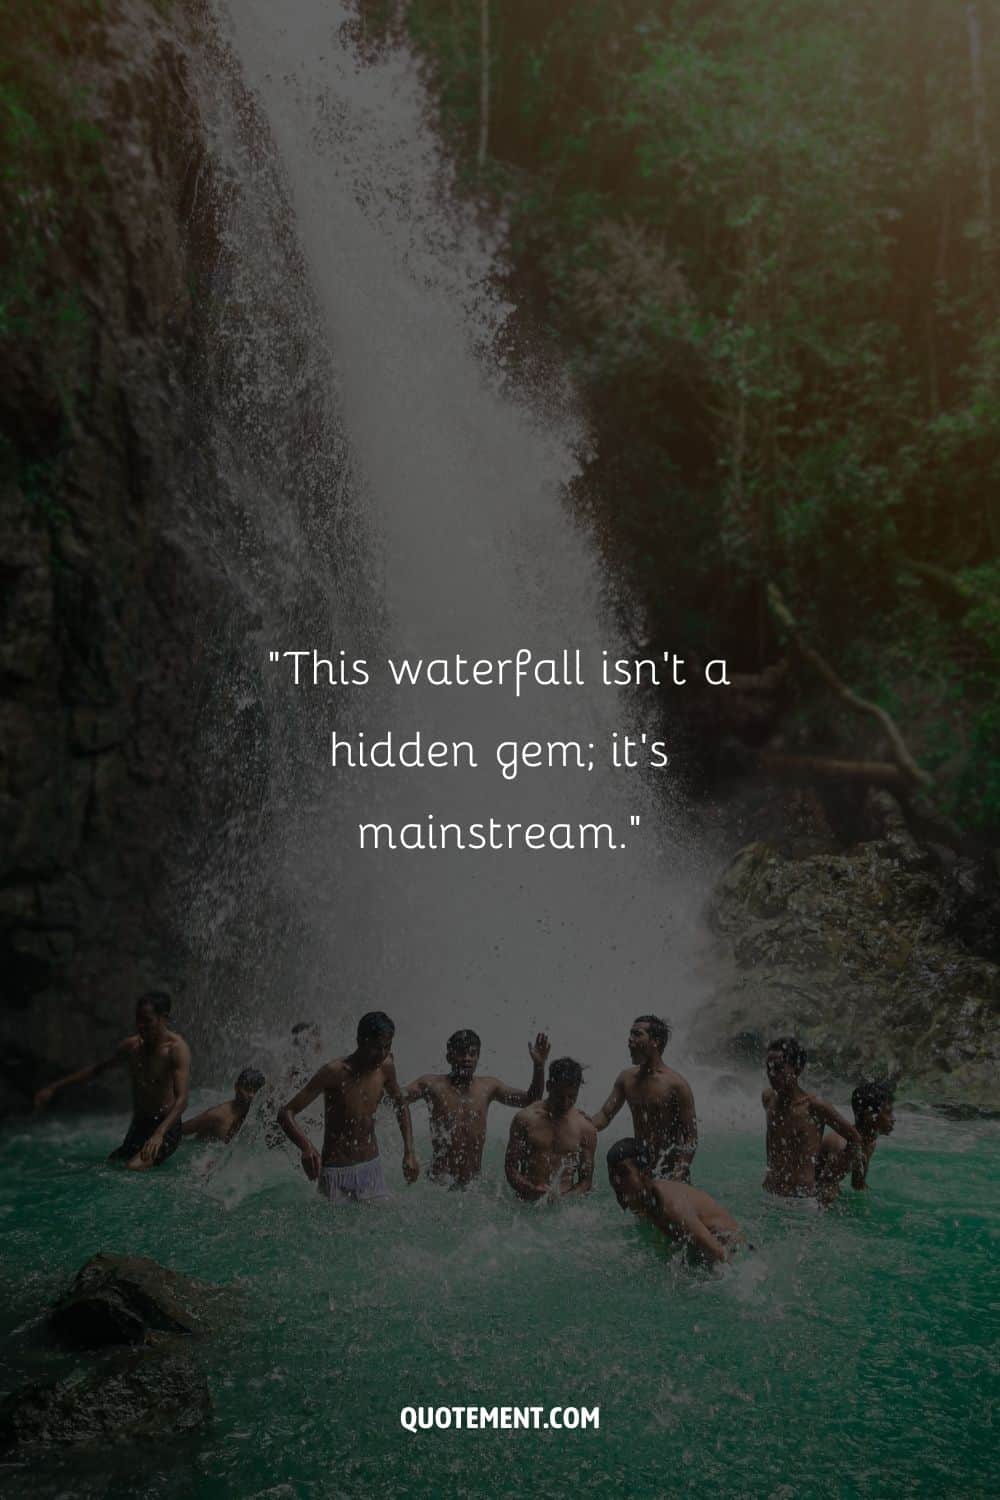 Funny quote on a waterfall and a group of boys by the waterfall in the background
